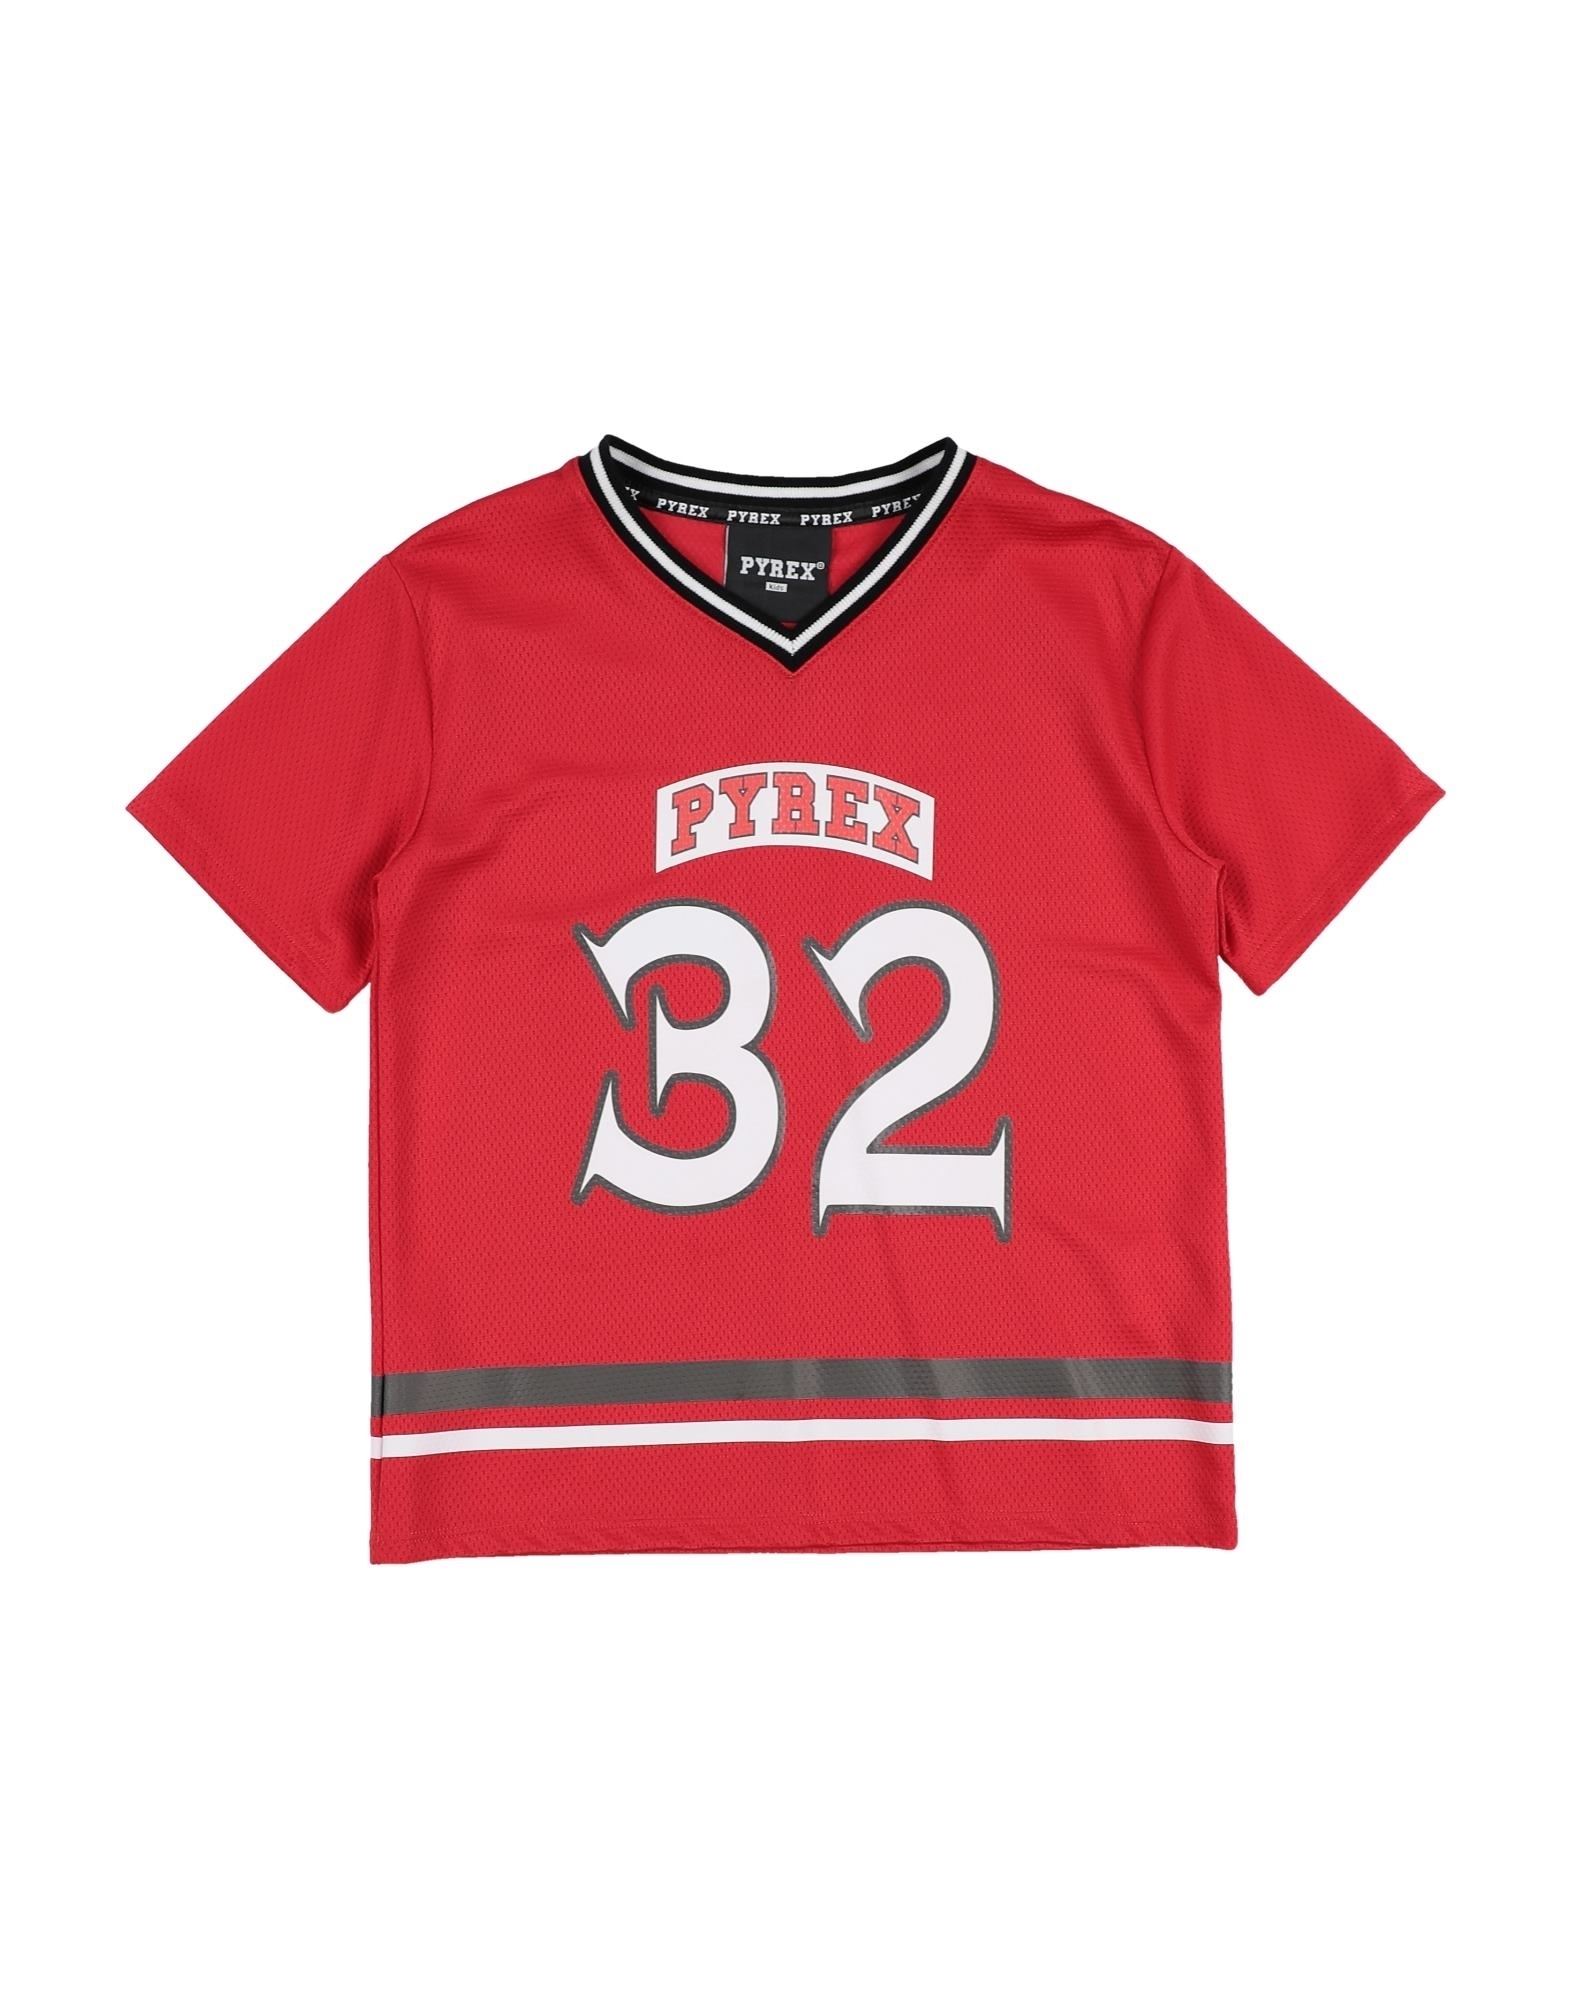 Pyrex Kids' T-shirts In Red